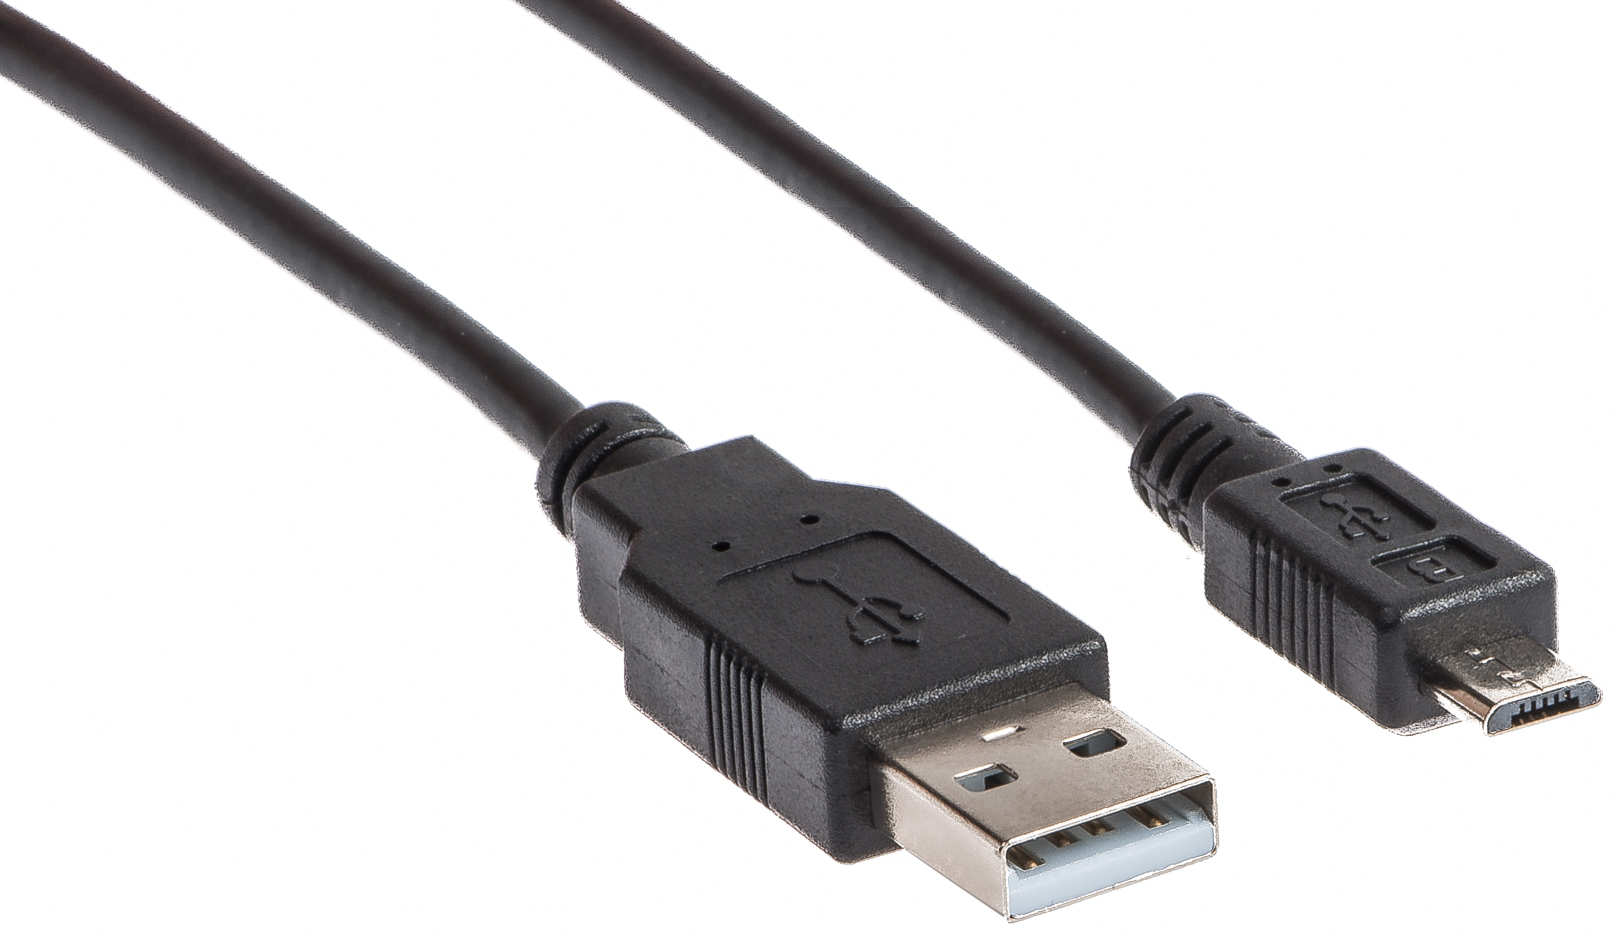 LINK2GO USB 2.0 Cable, A - Micro-B US2313KBB male/male, 2.0m male/male, 2.0m